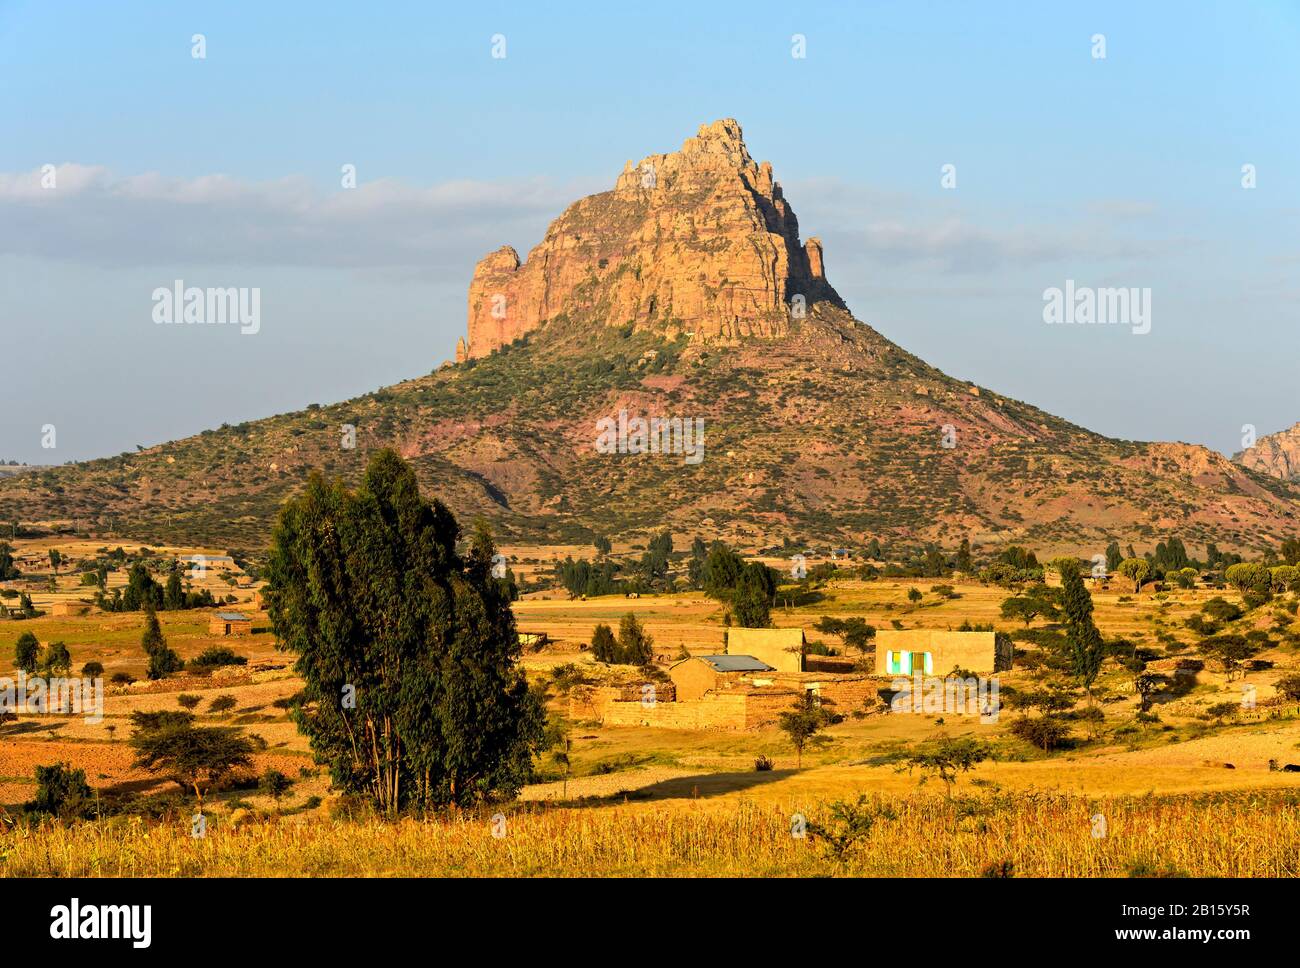 Landscape with eroded flat-topped mountain, Amba, in the Ethiopian Highlands, Tigray, Ethiopia Stock Photo